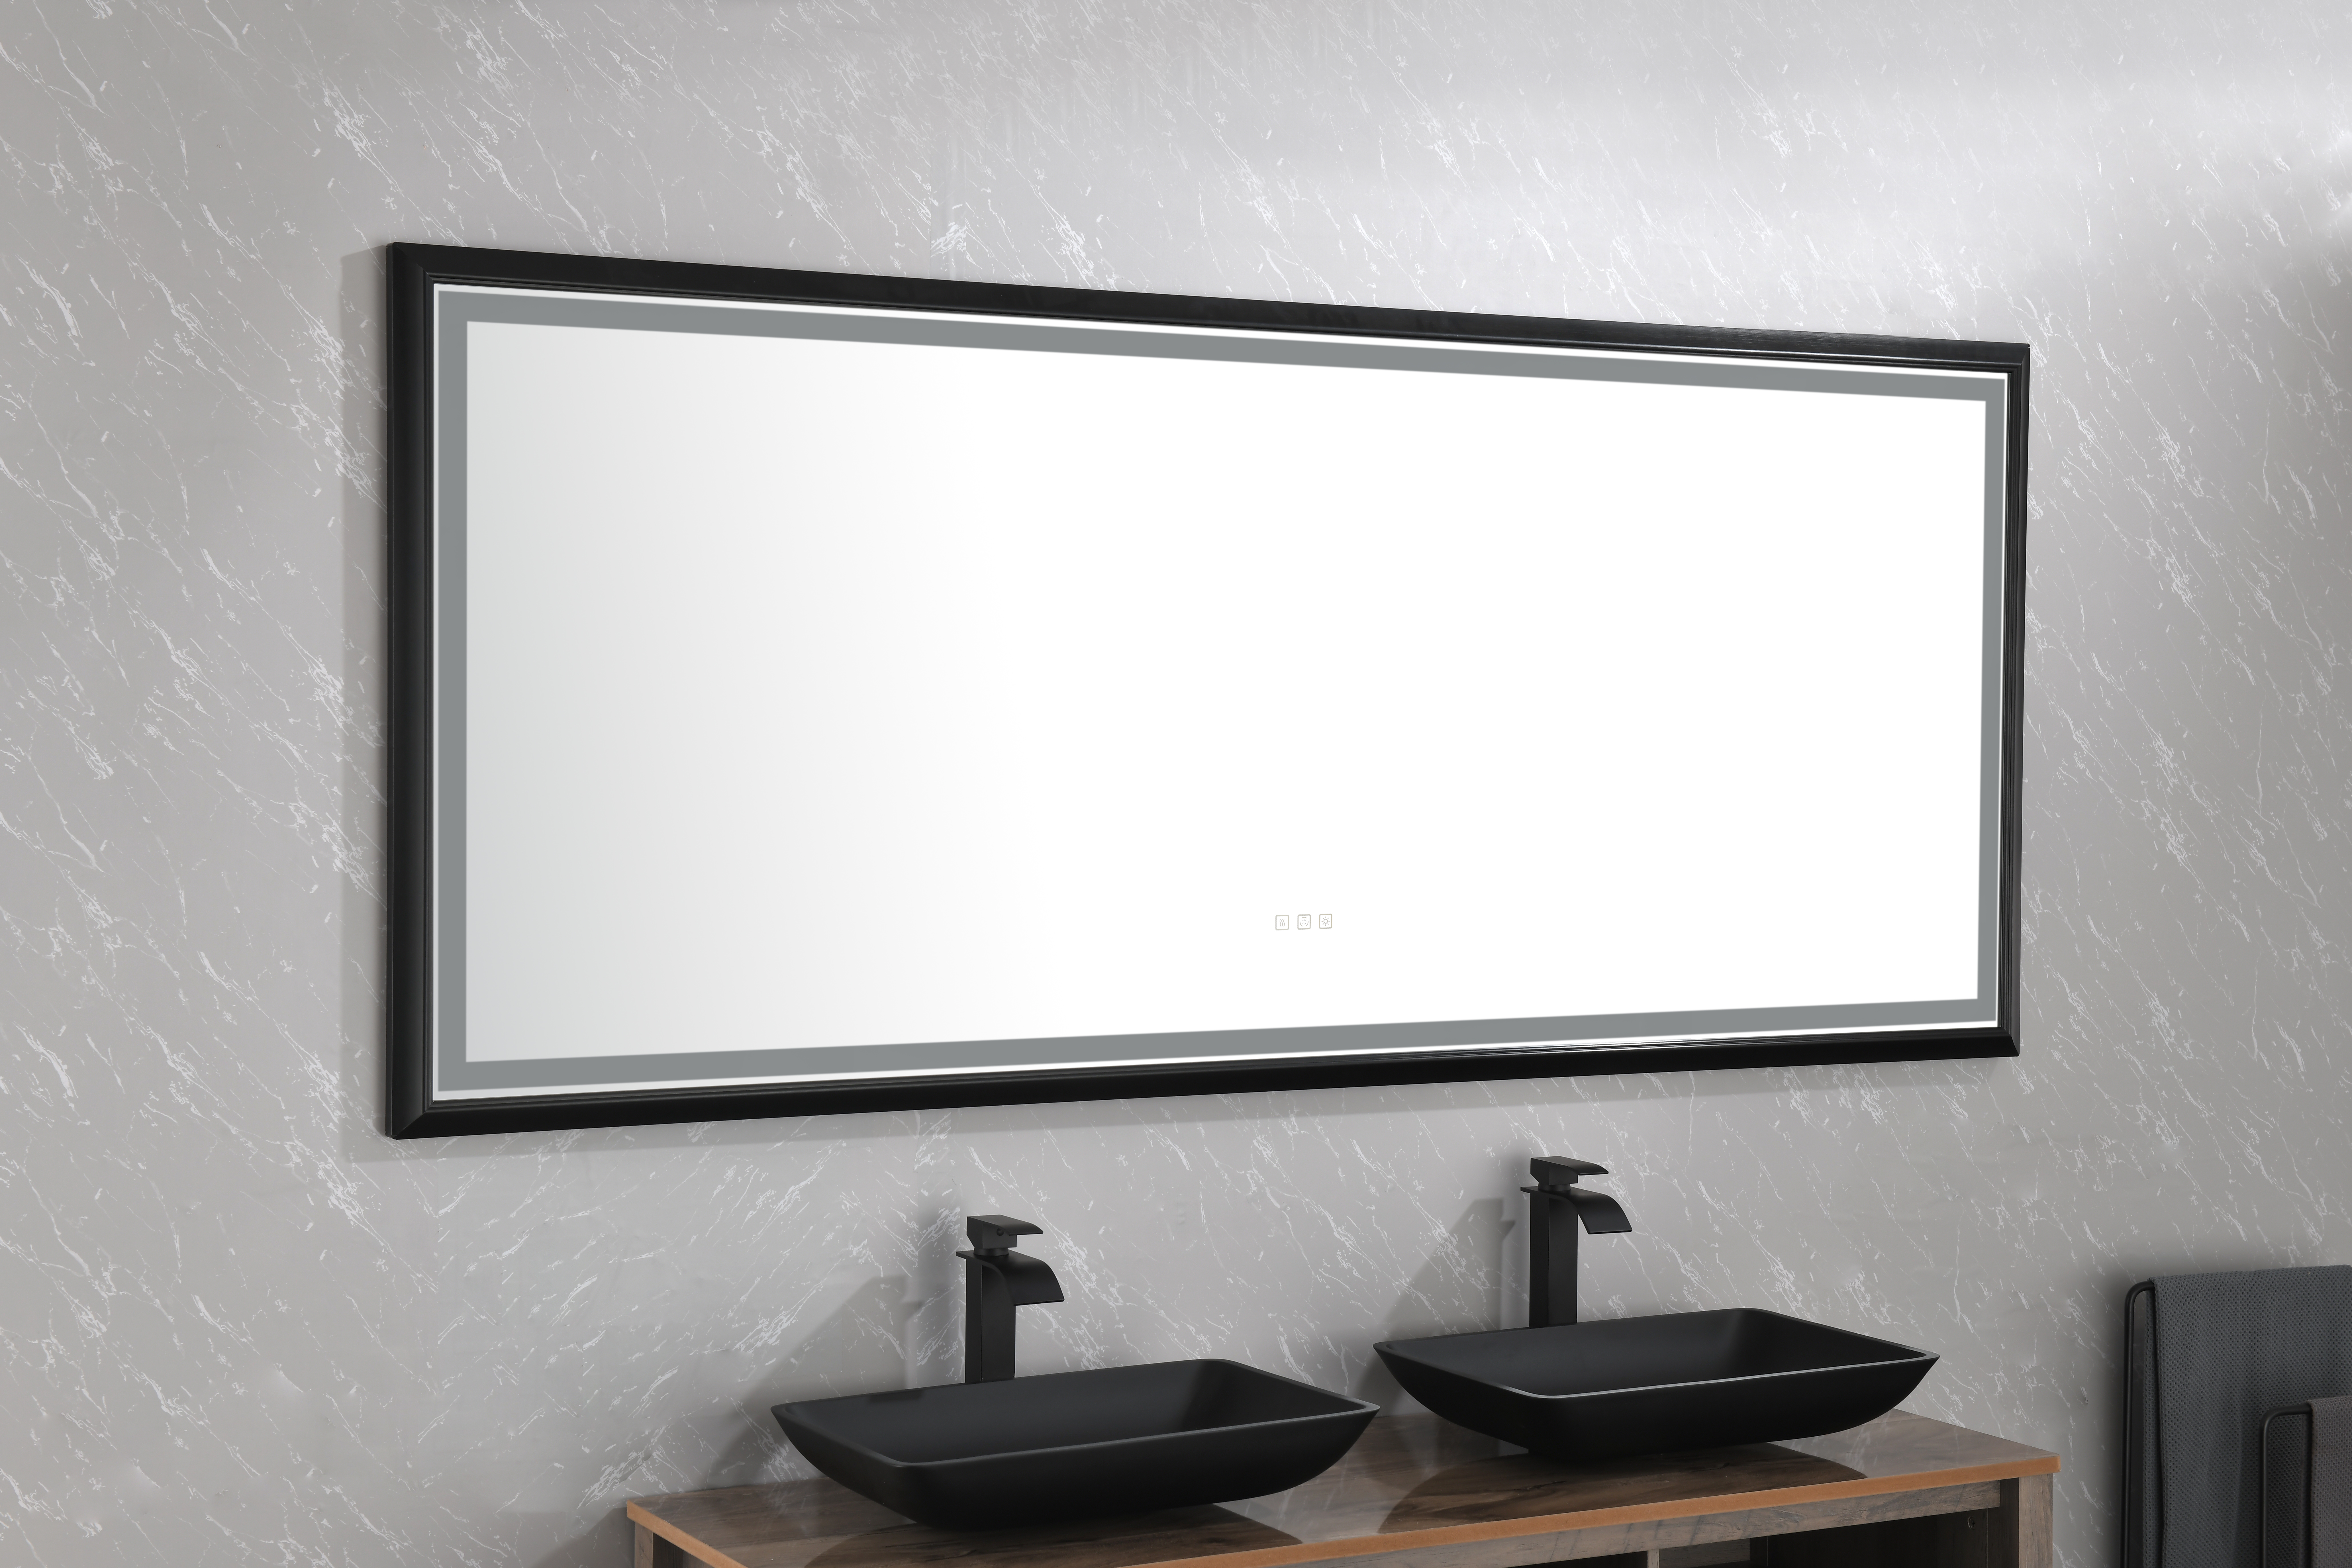 88 in. W x 38 in. H Oversized Rectangular Black Framed LED Mirror Anti-Fog Dimmable Wall Mount Bathroom Vanity Mirror \\\\n\\\\nHD Wall Mirror Kit For Gym And Dance Studio 38 X 88Inches With Safety Backin-CASAINC